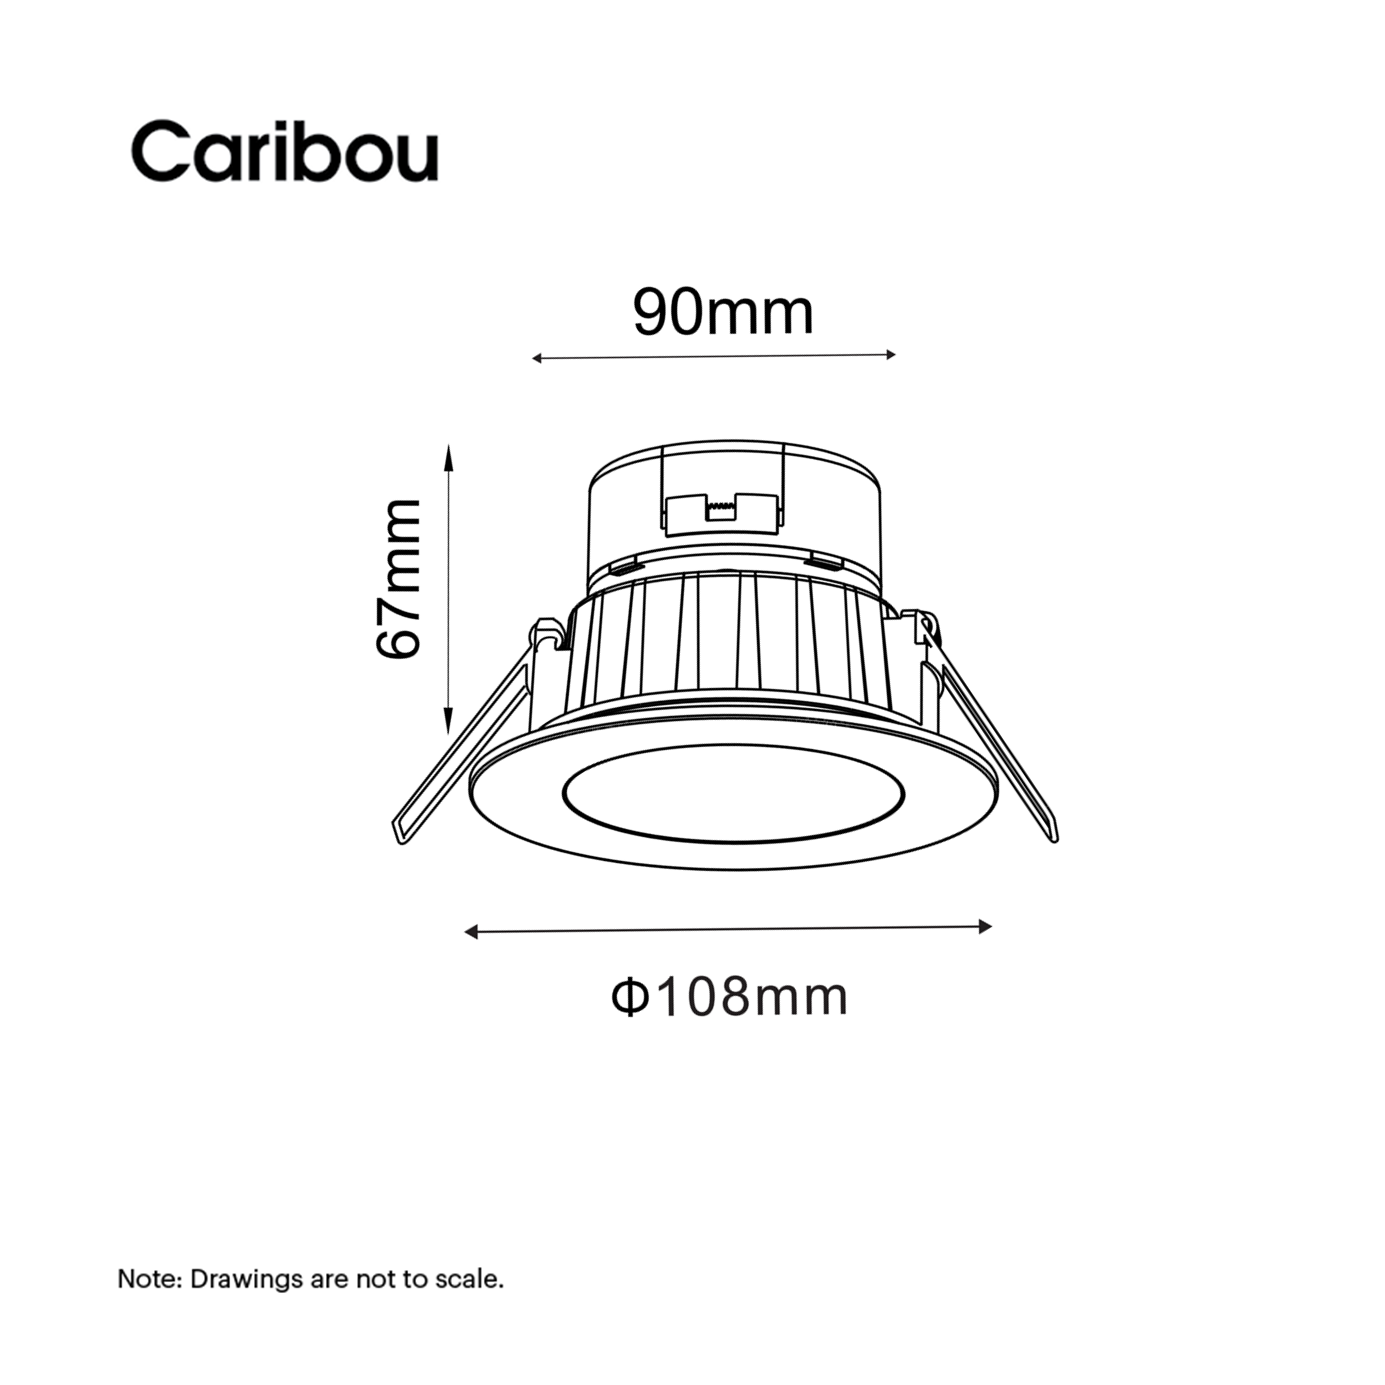 Marlin 10W Recessed LED Down Light (IC4 Rated) IP44 Rated 3000K (Warm White) White Finish